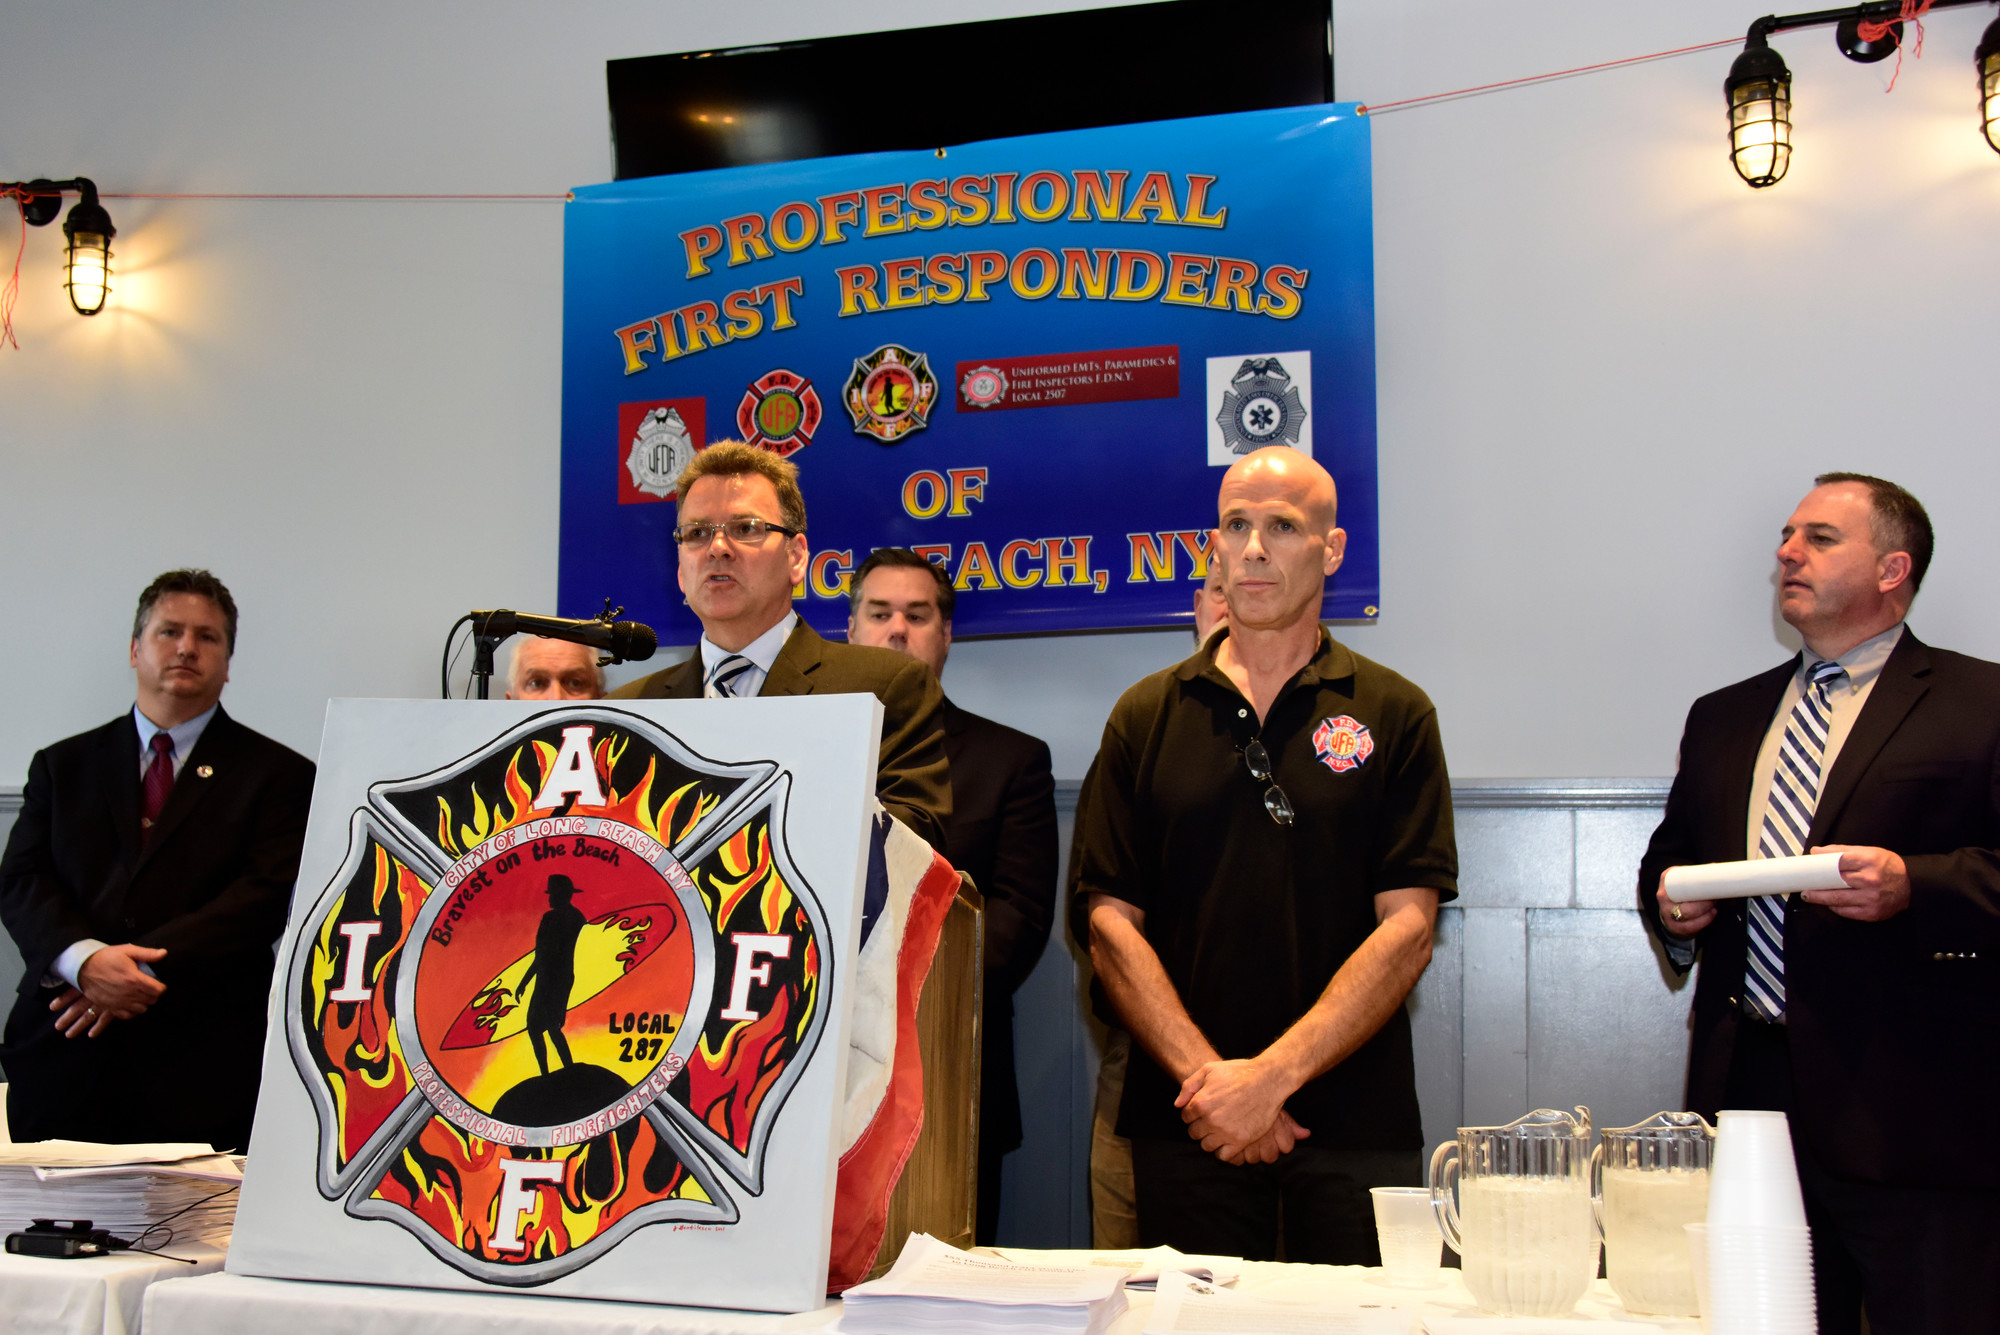 Local 287 President Billy Piazza was joined by FDNY firefighters and labor leaders at the Knights of Columbus on Monday.